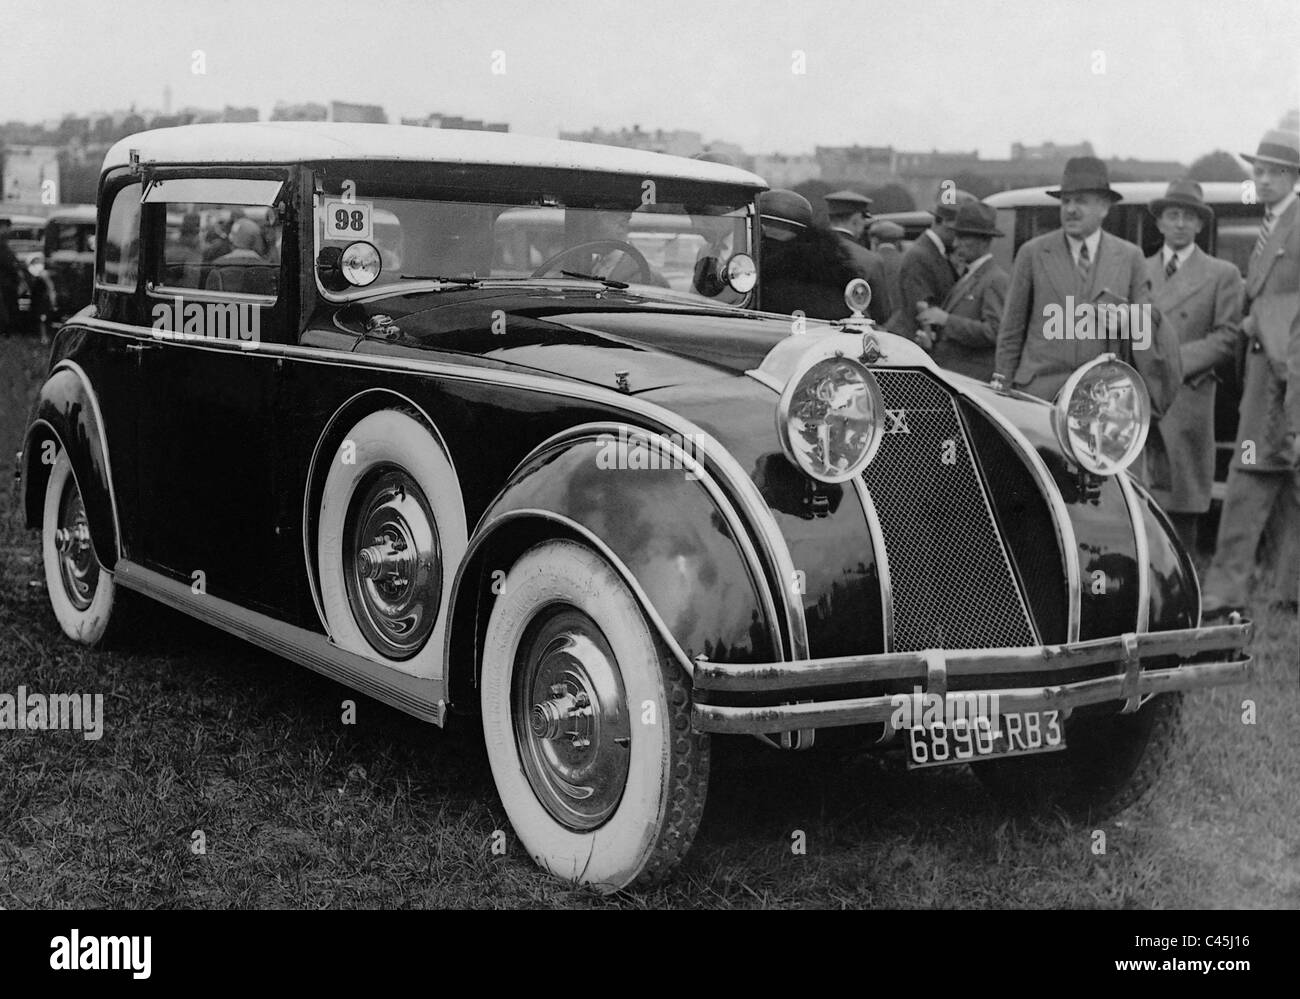 Automobile of Citroen from the 1930s Stock Photo